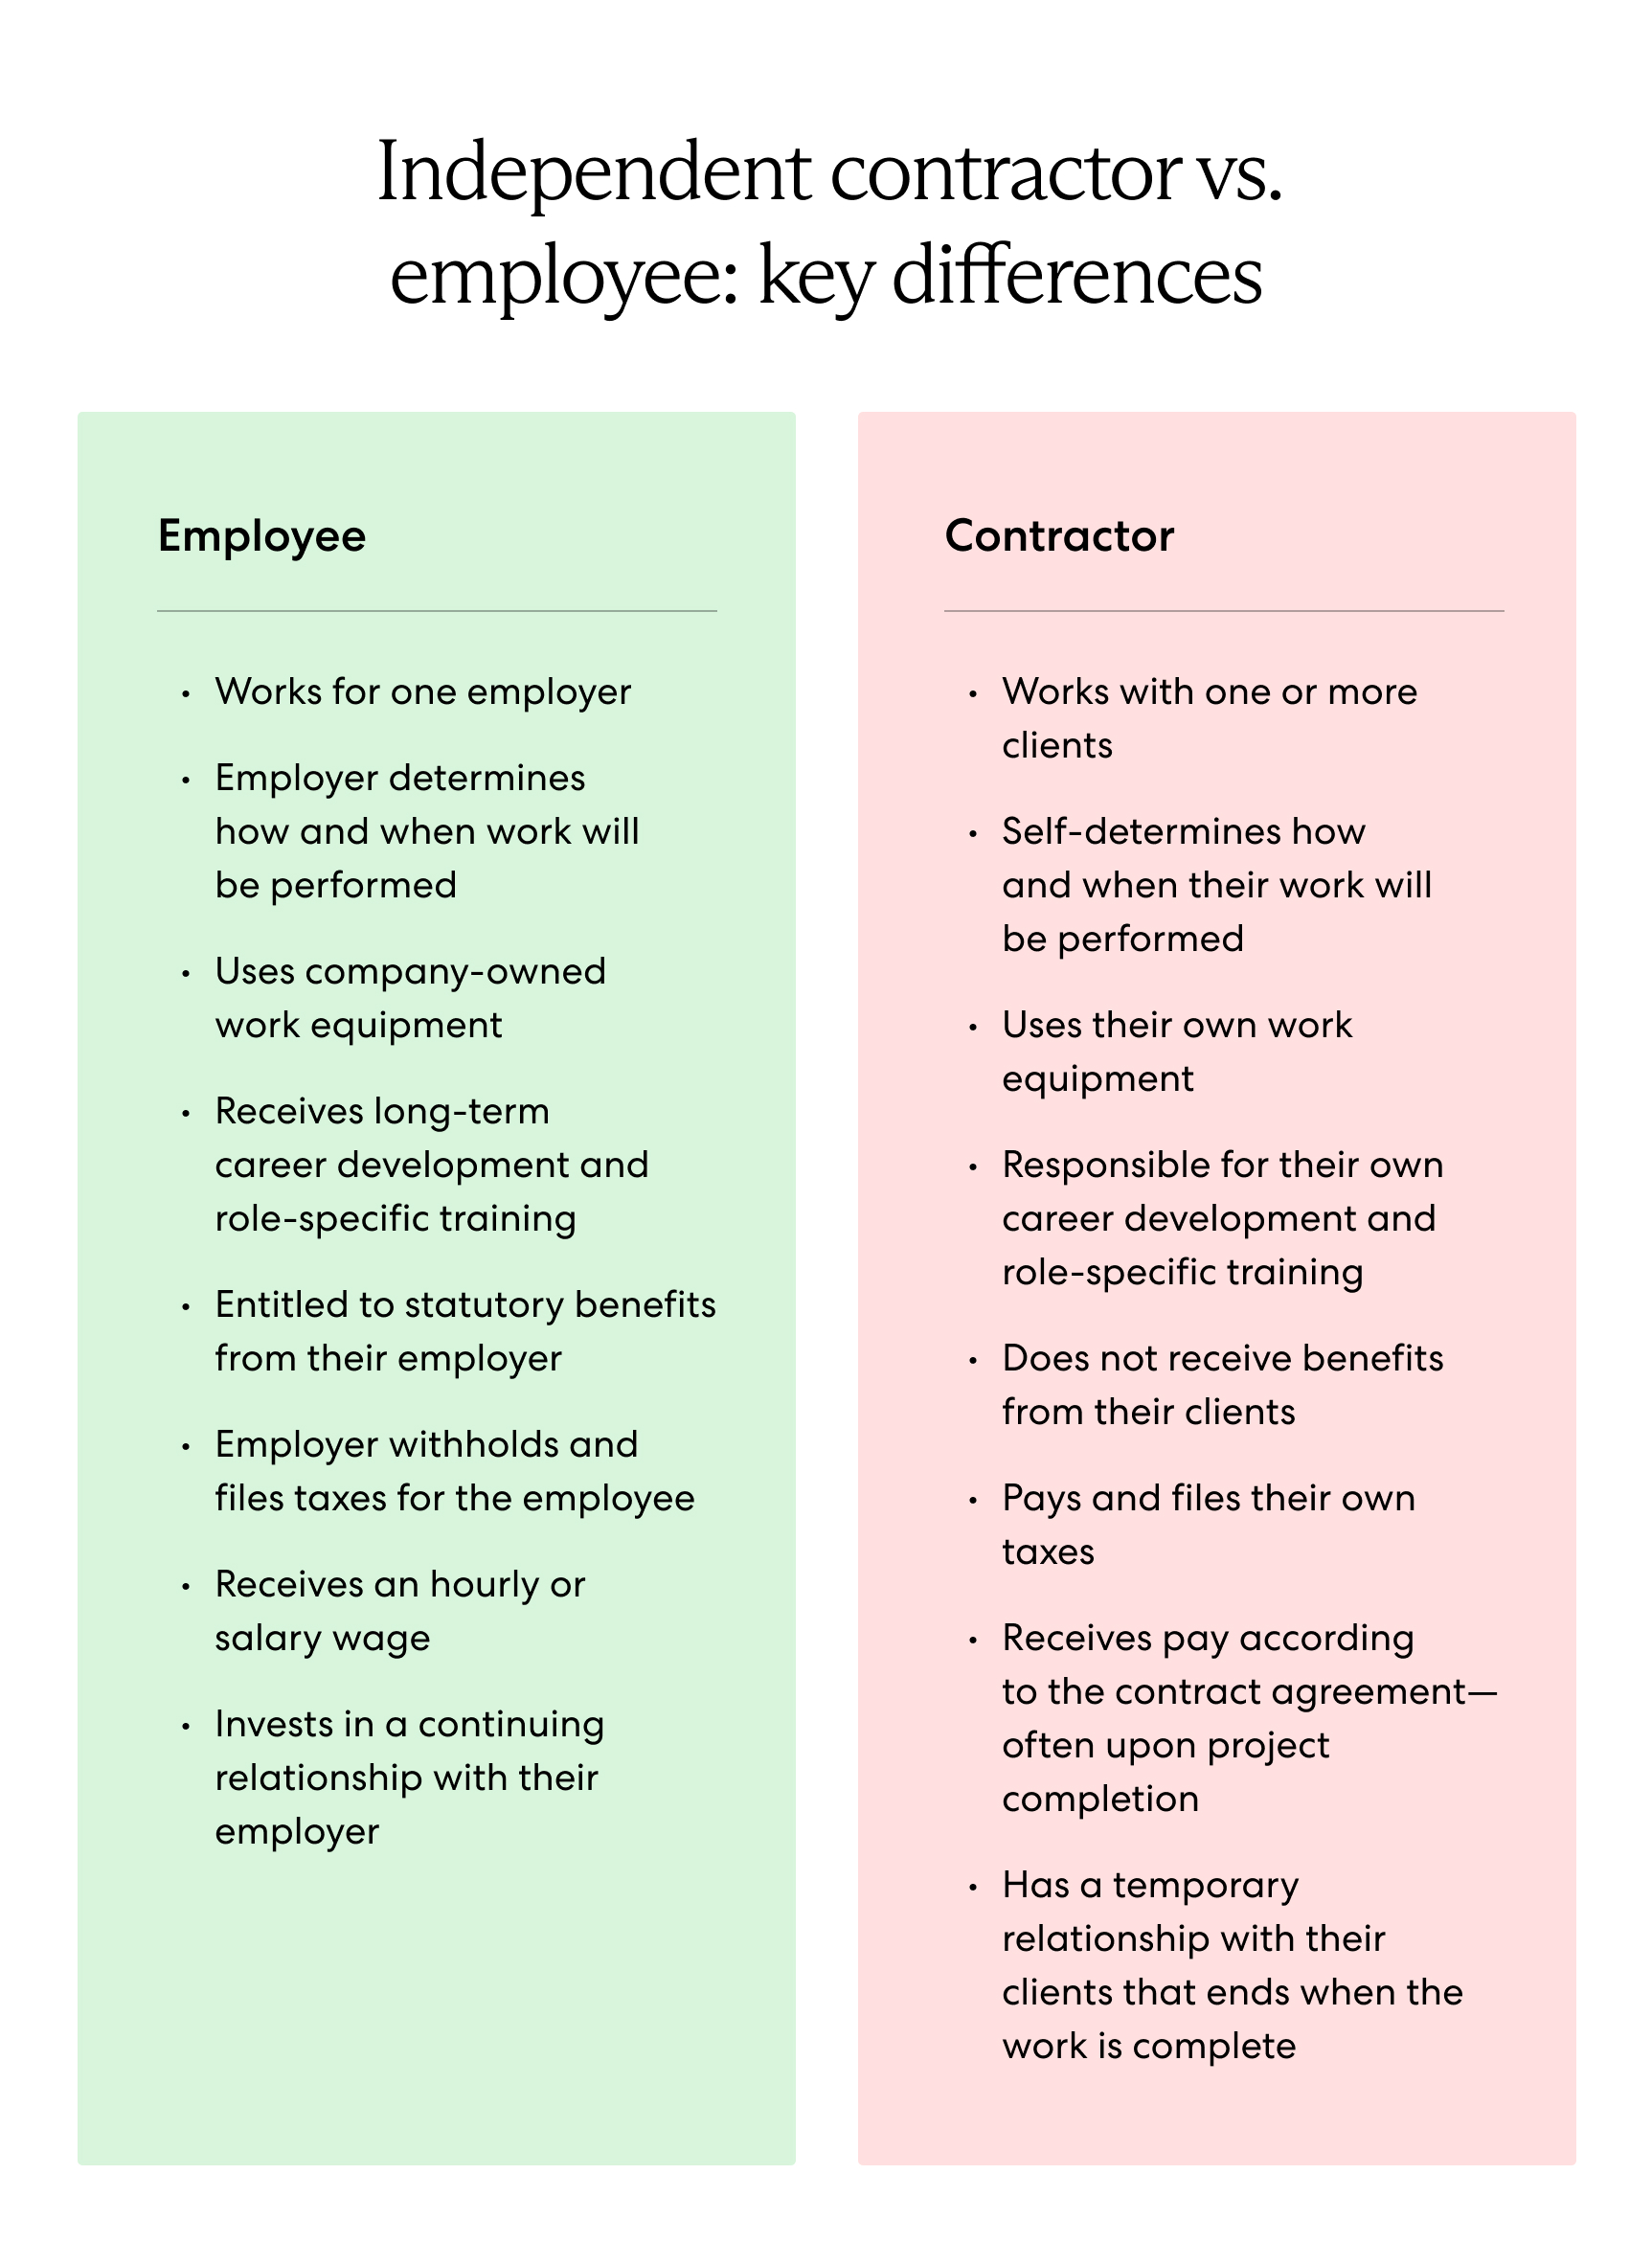 Infographic comparing the key differences between an employee and an independent contractor